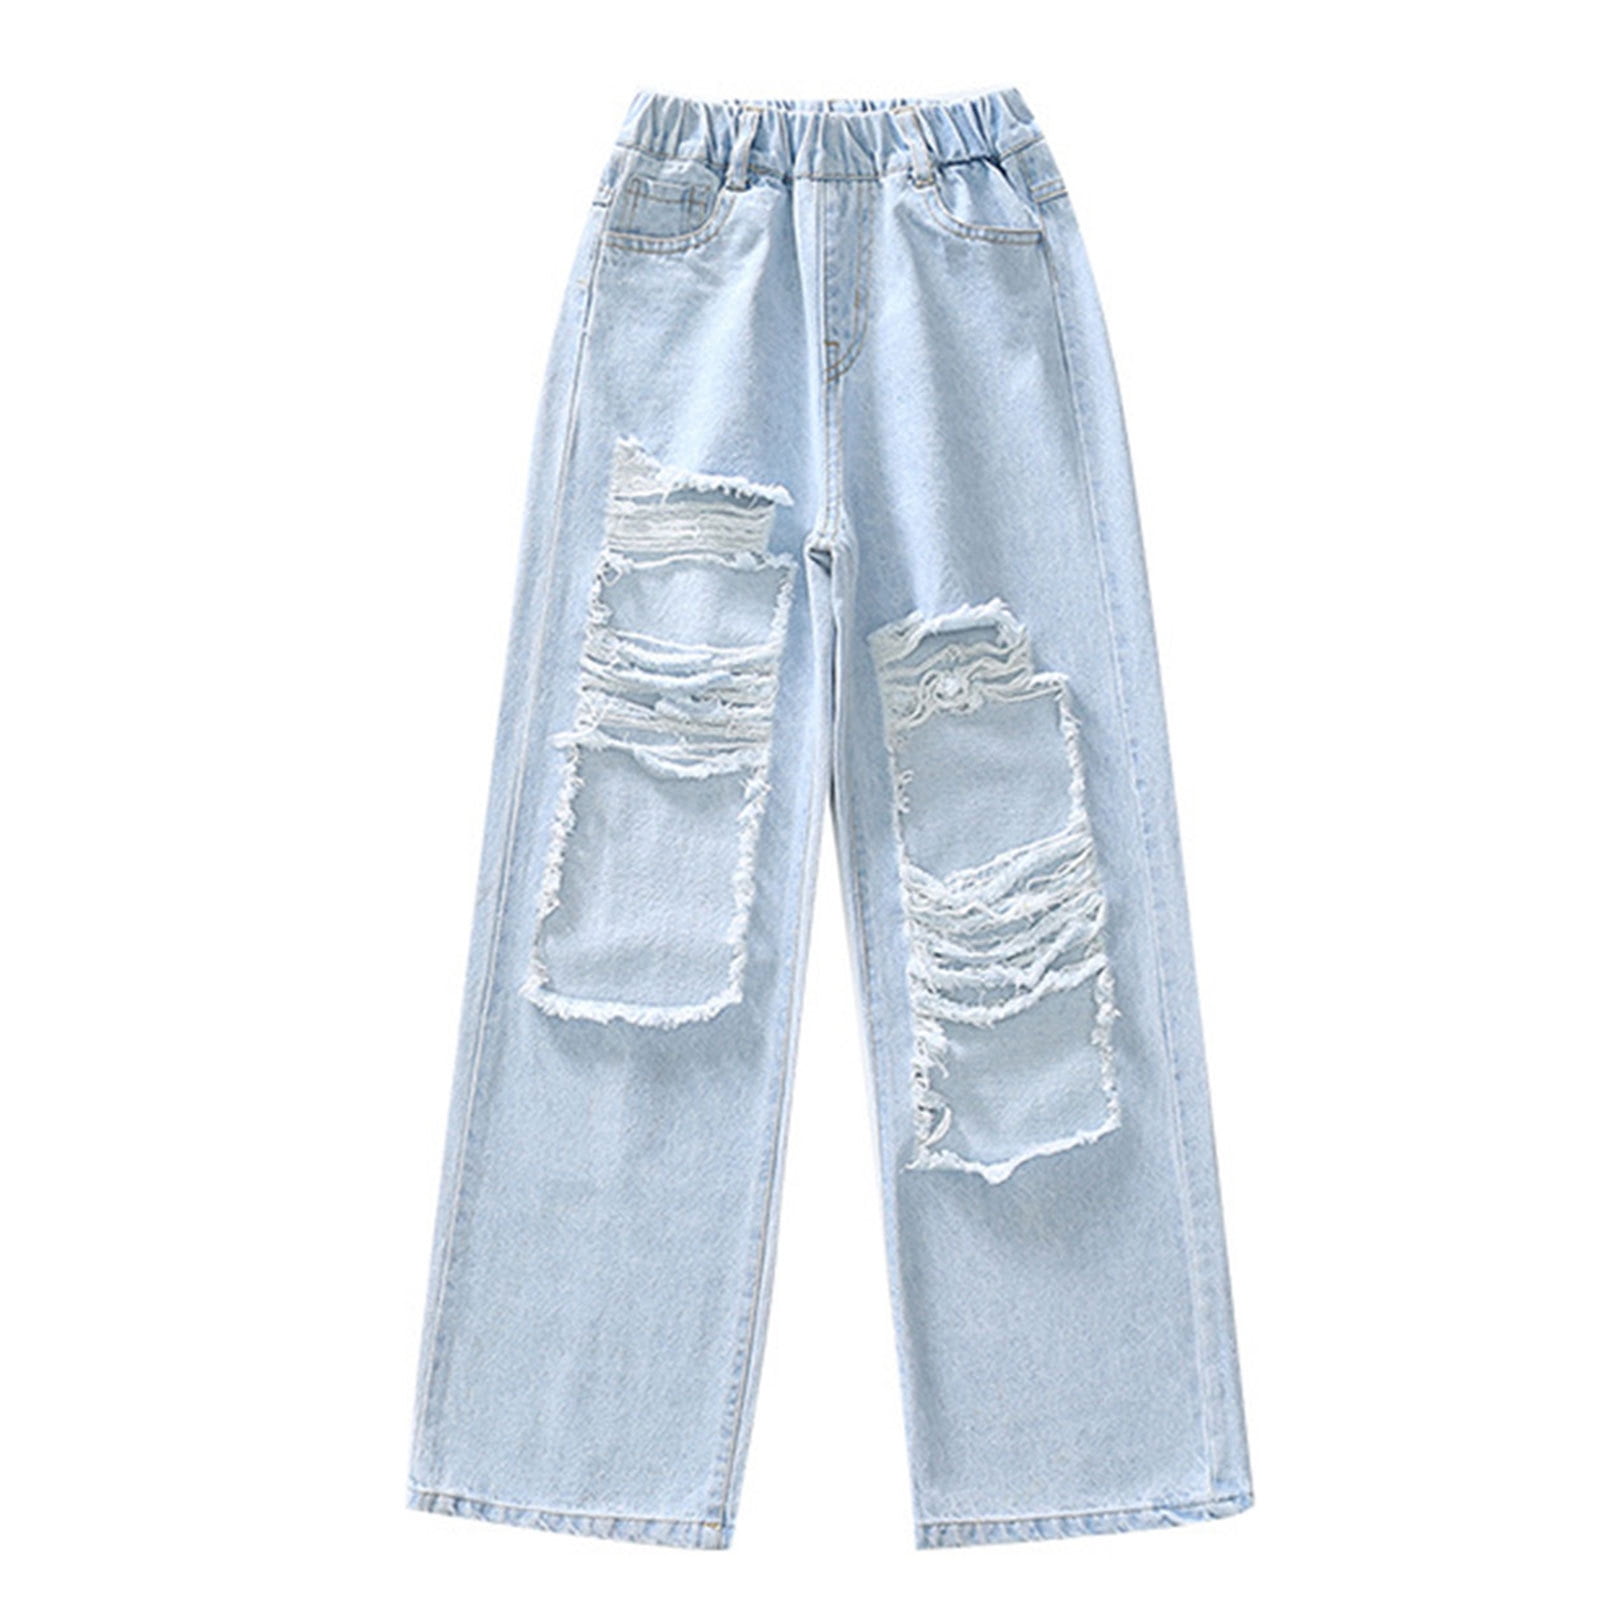 DPOIS Kids High Waisted Ripped Jeans Girls Casual Loose Fit Distressed  Denim Pants Blue 10-12